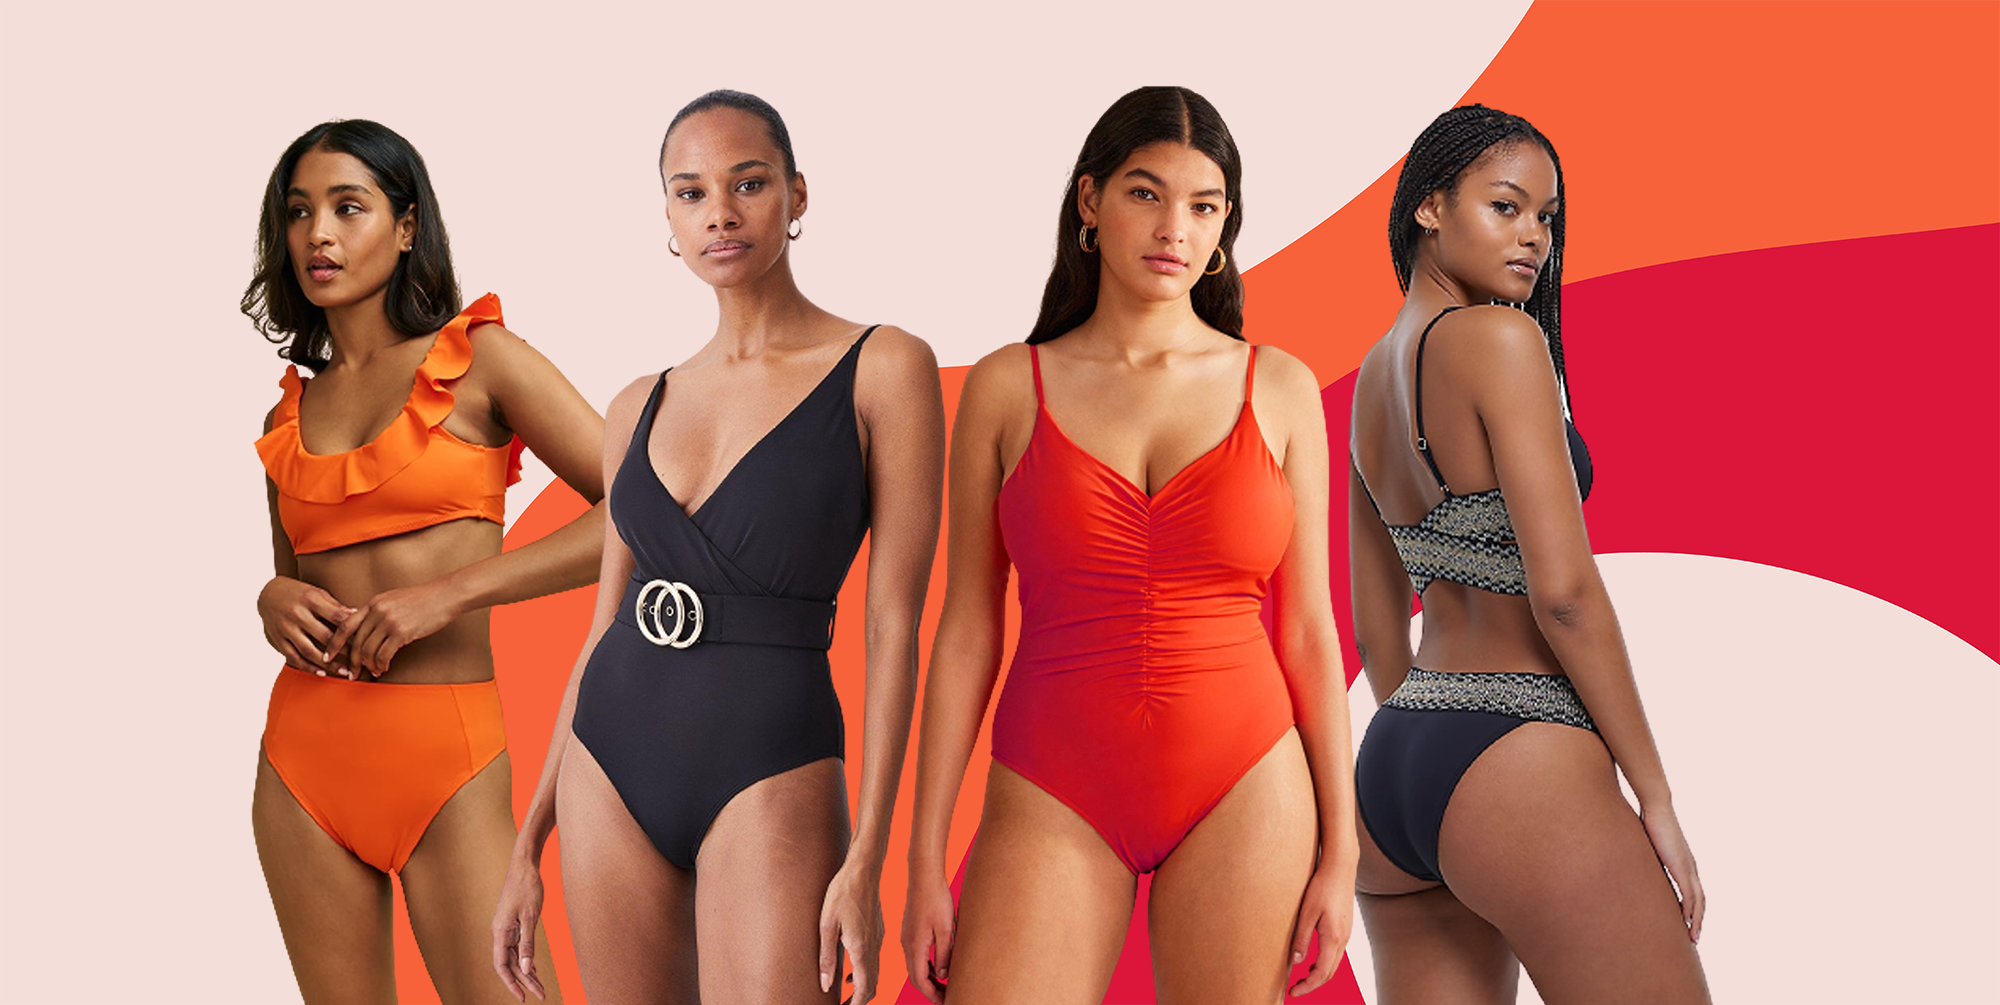 Underwire Swimsuits  Famous for Fit - Supportive Swimwear for Women